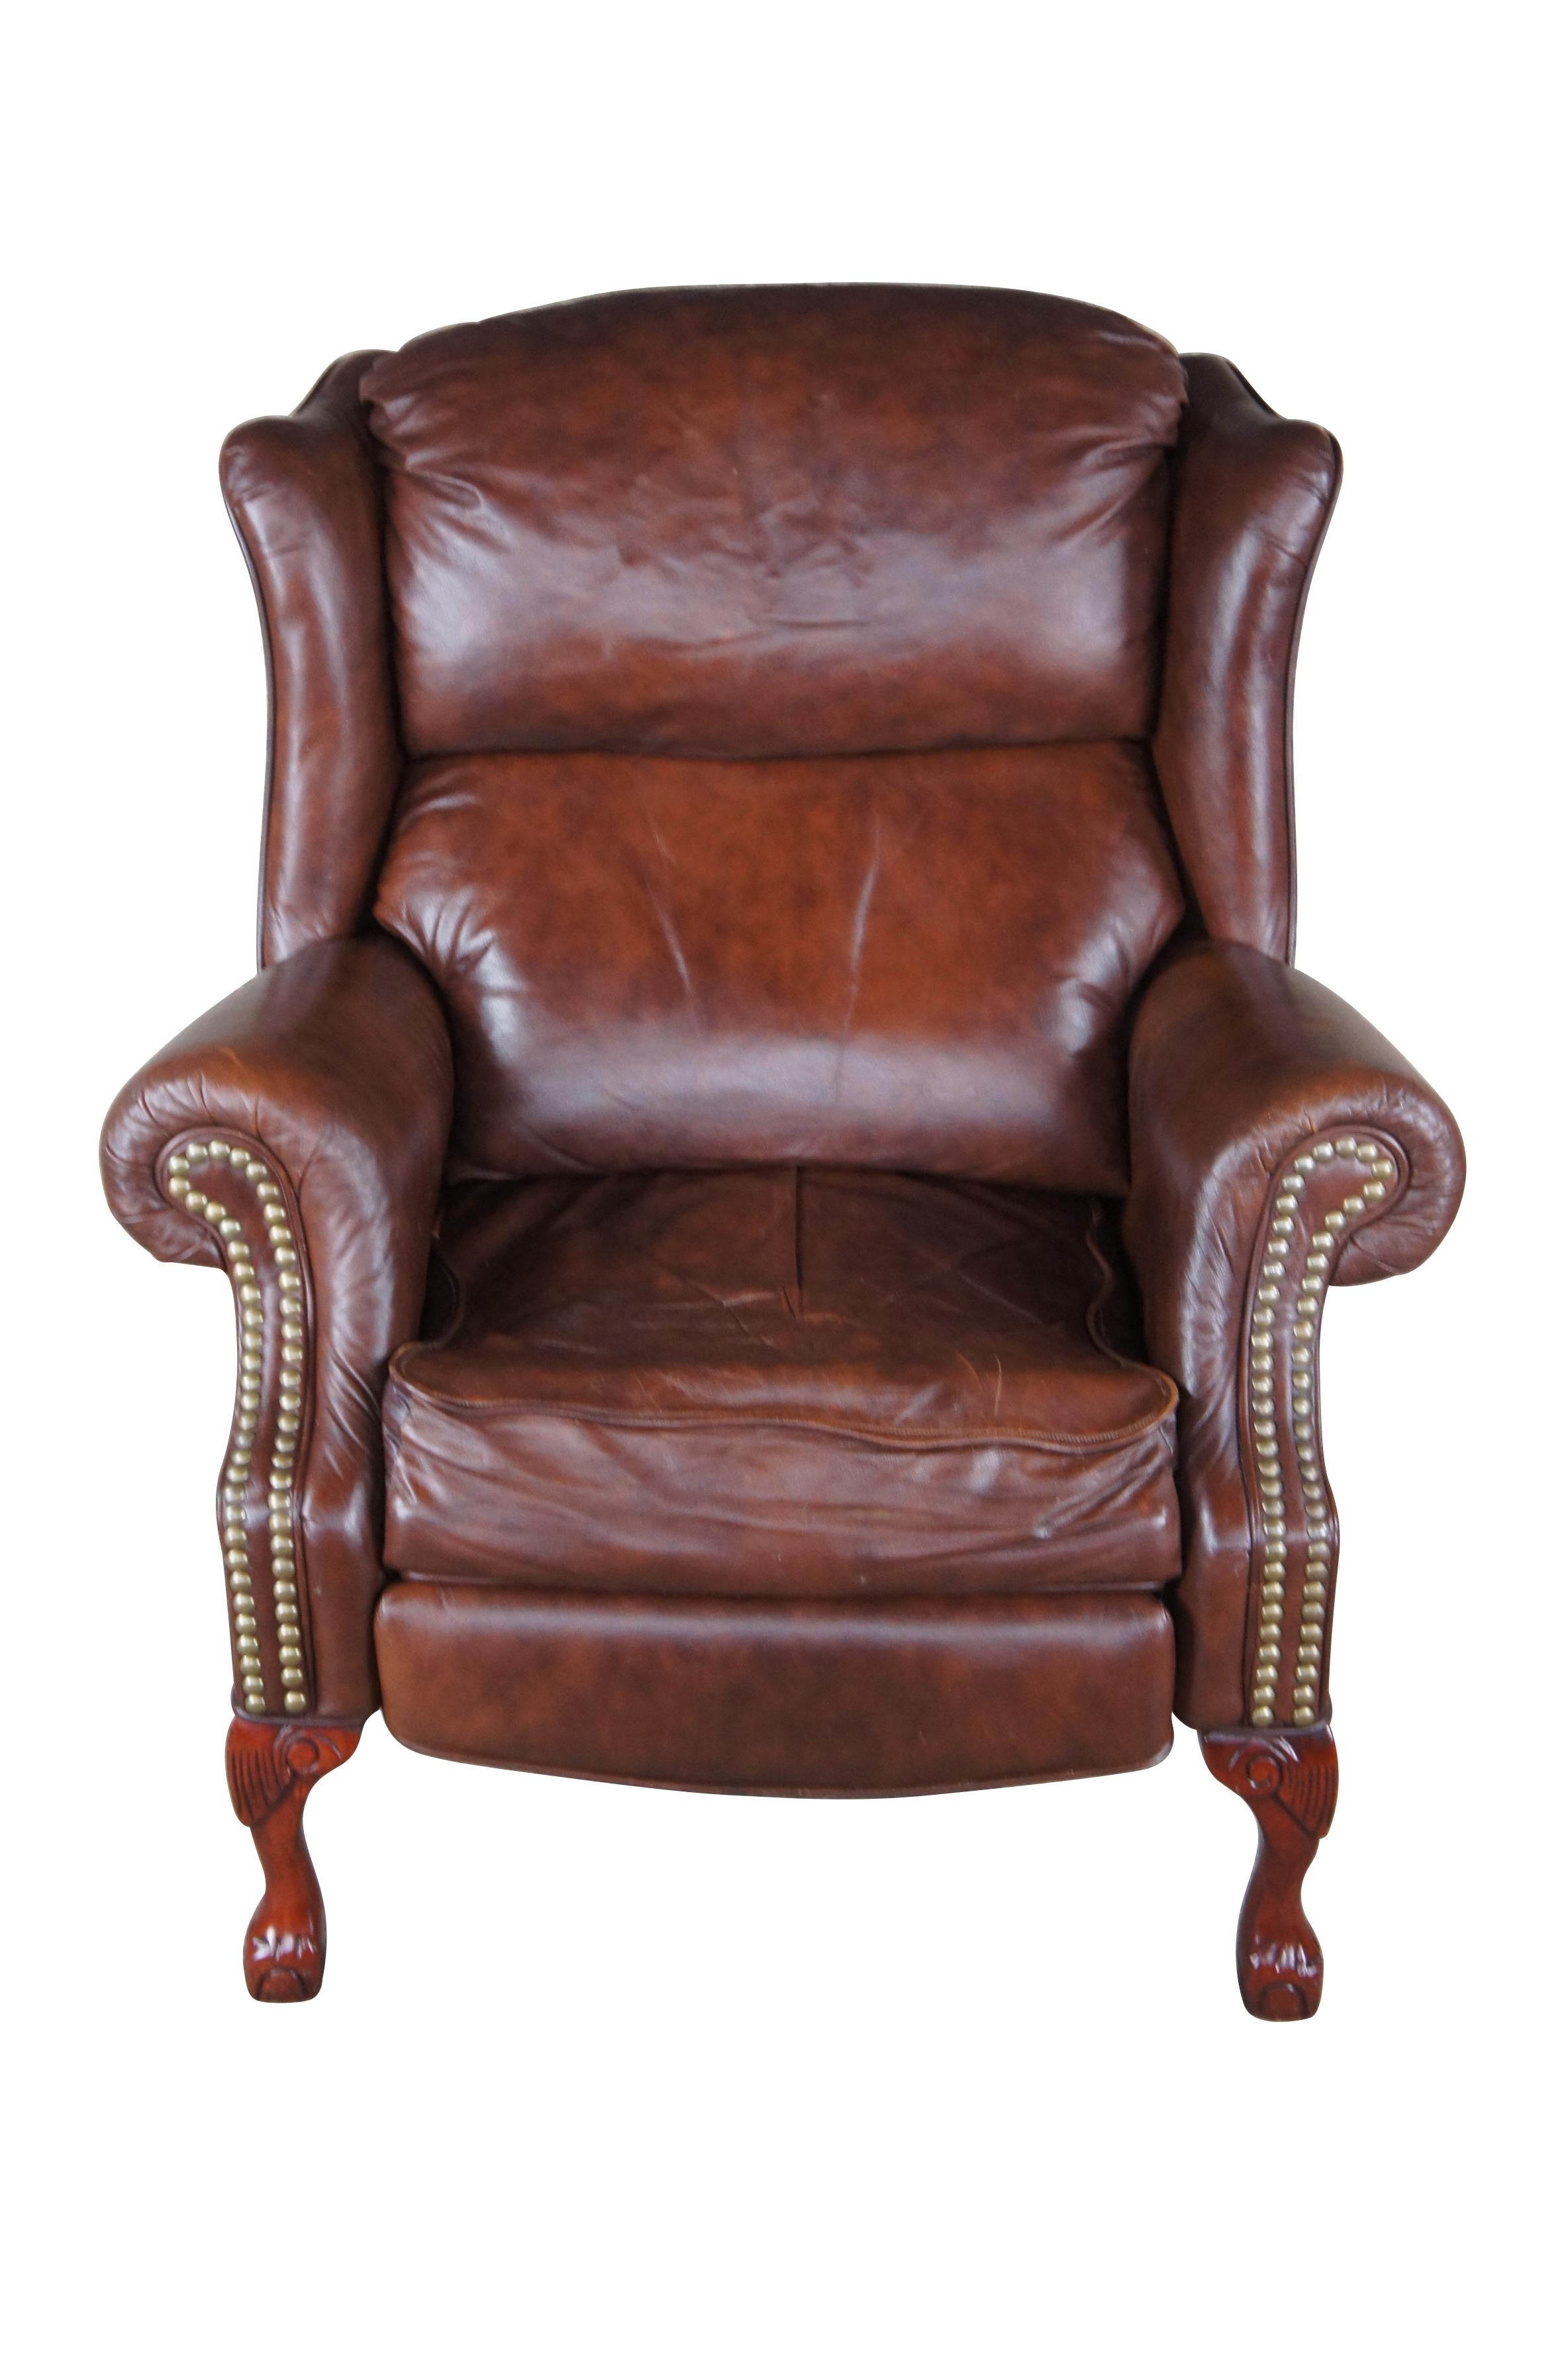 brown leather wingback recliner